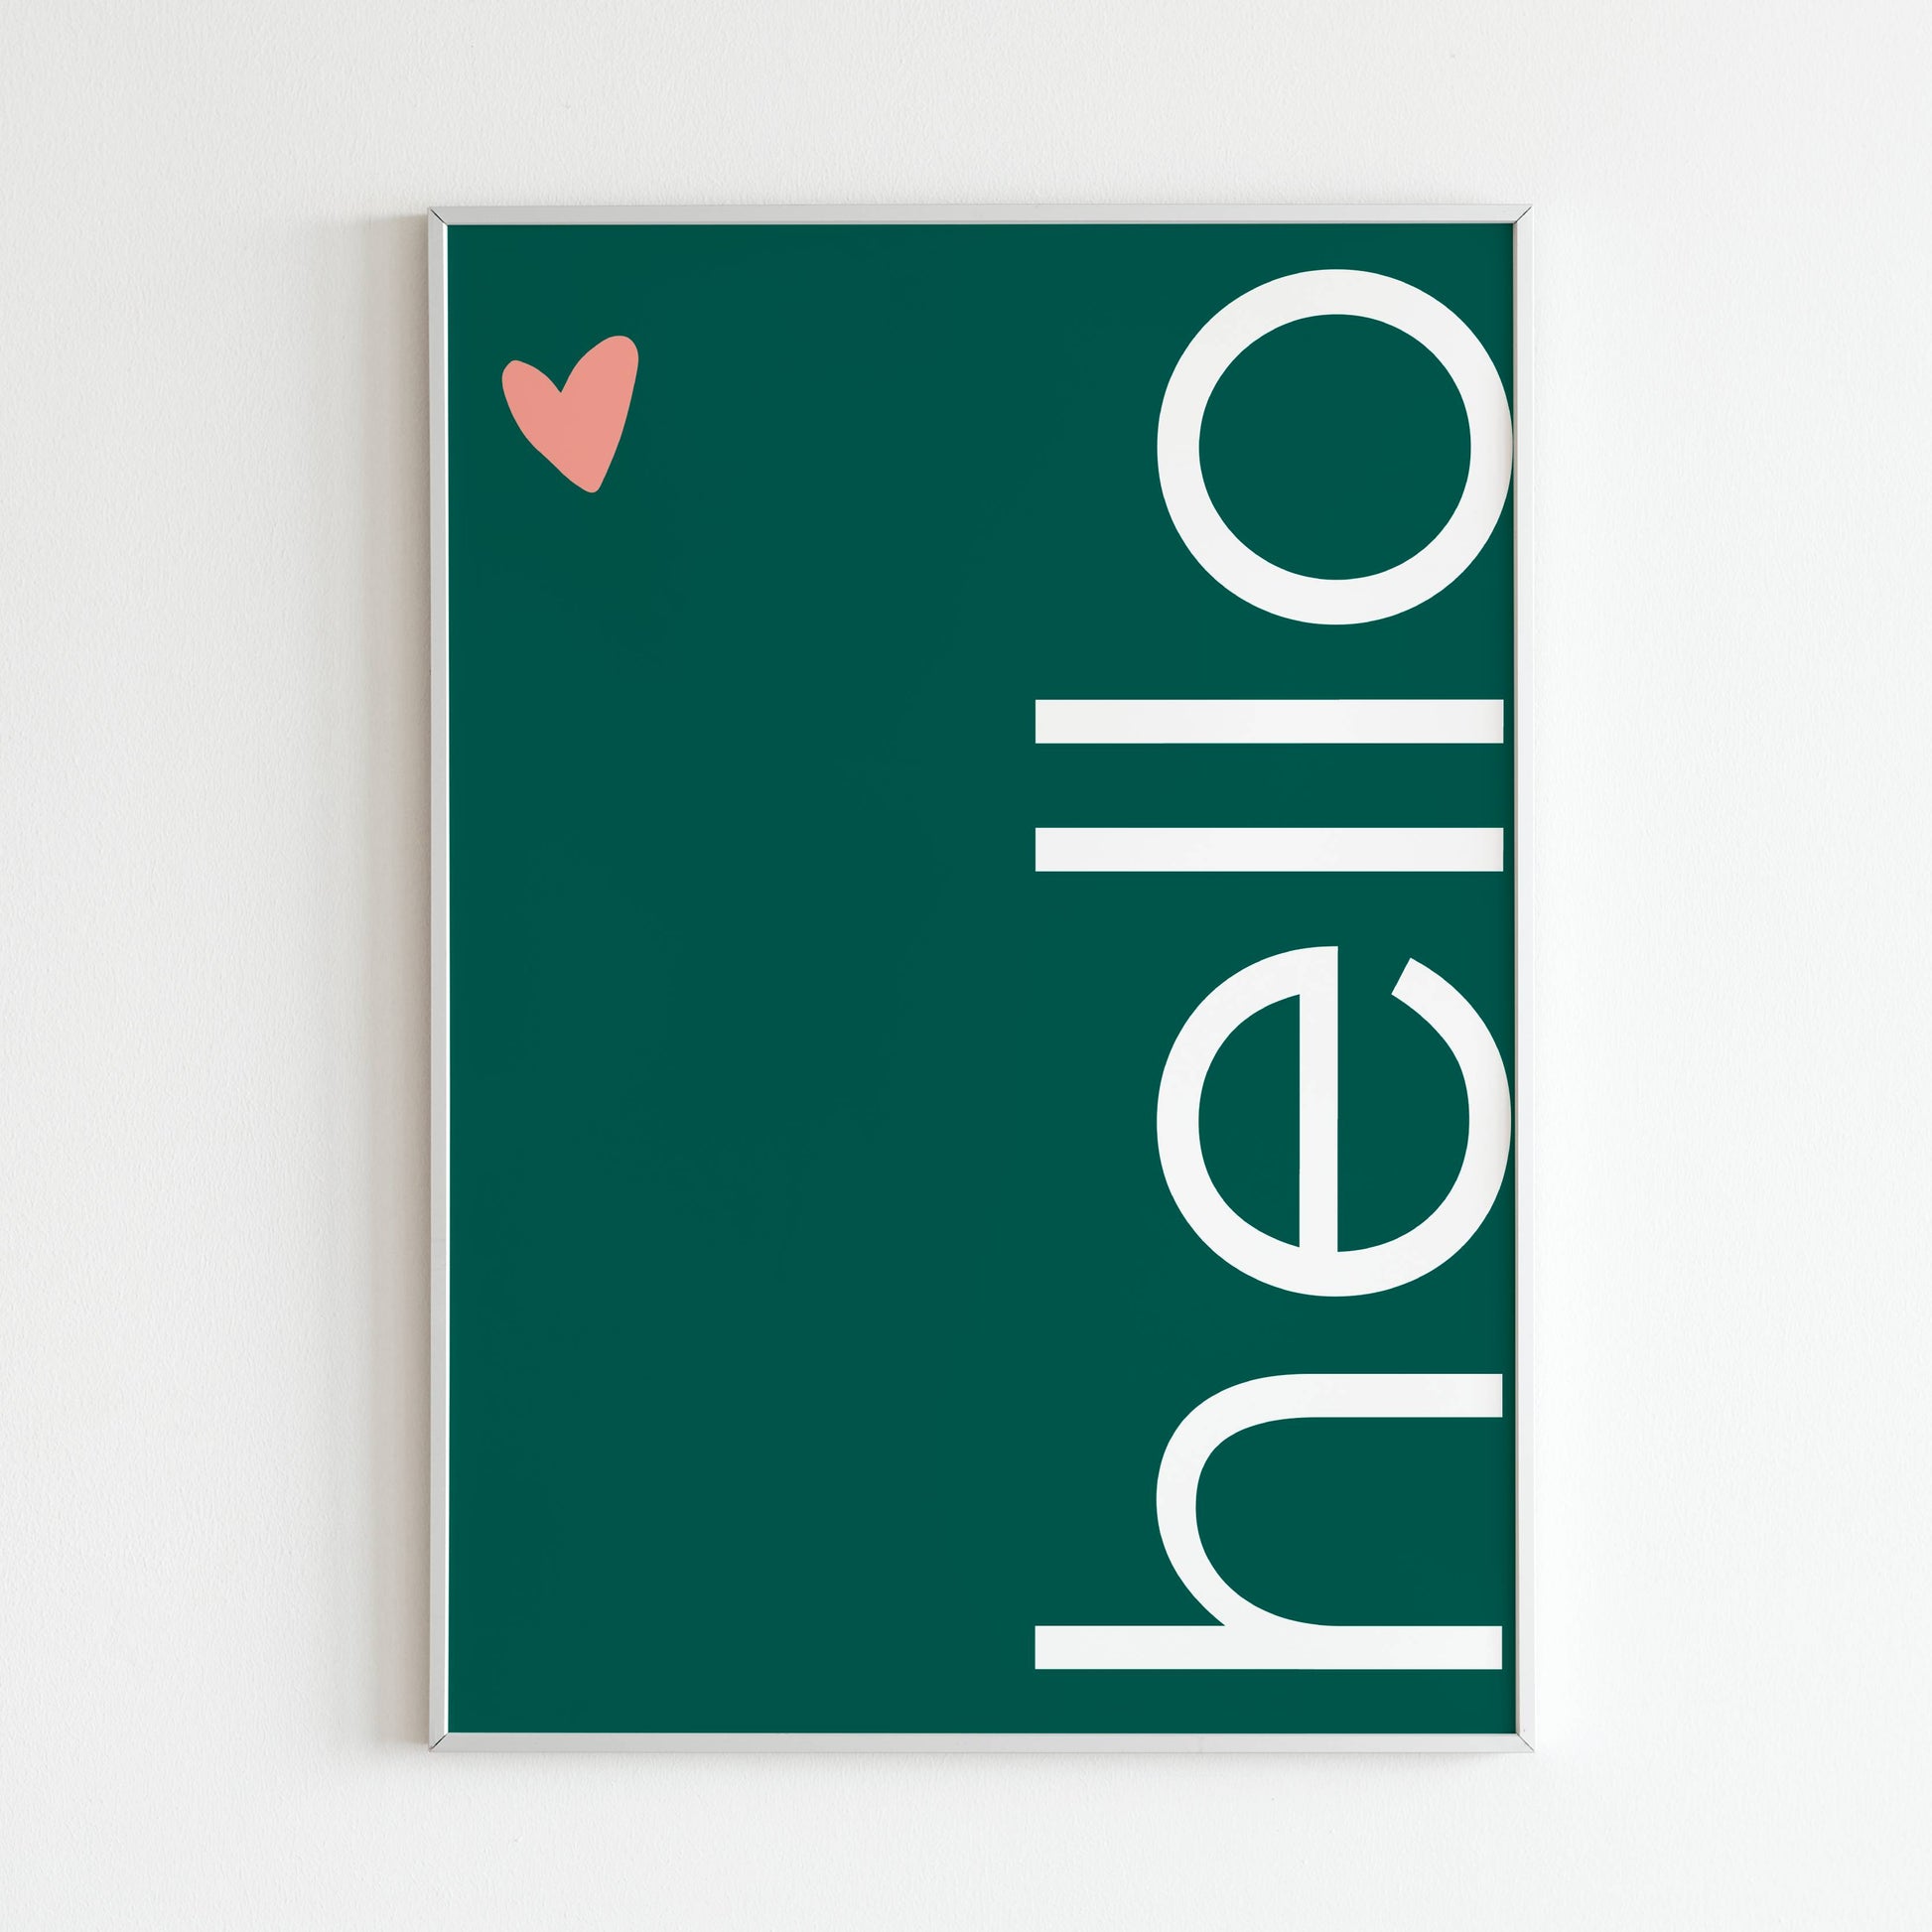 Downloadable "Hello" wall art to welcome guests or brighten your space.